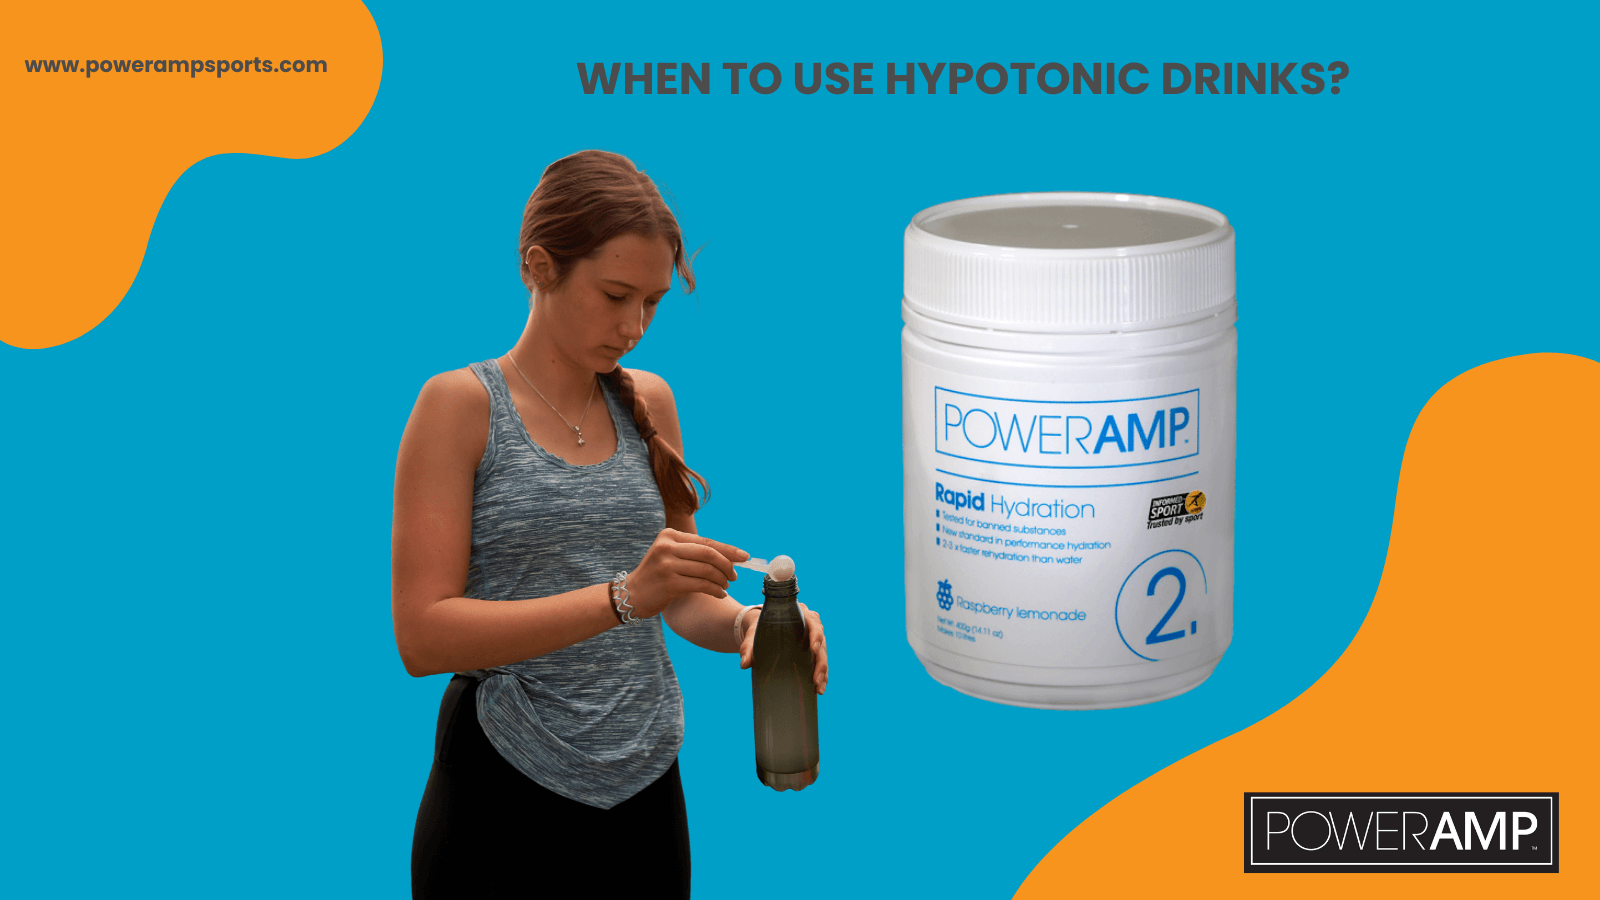 When to use hypotonic drinks?